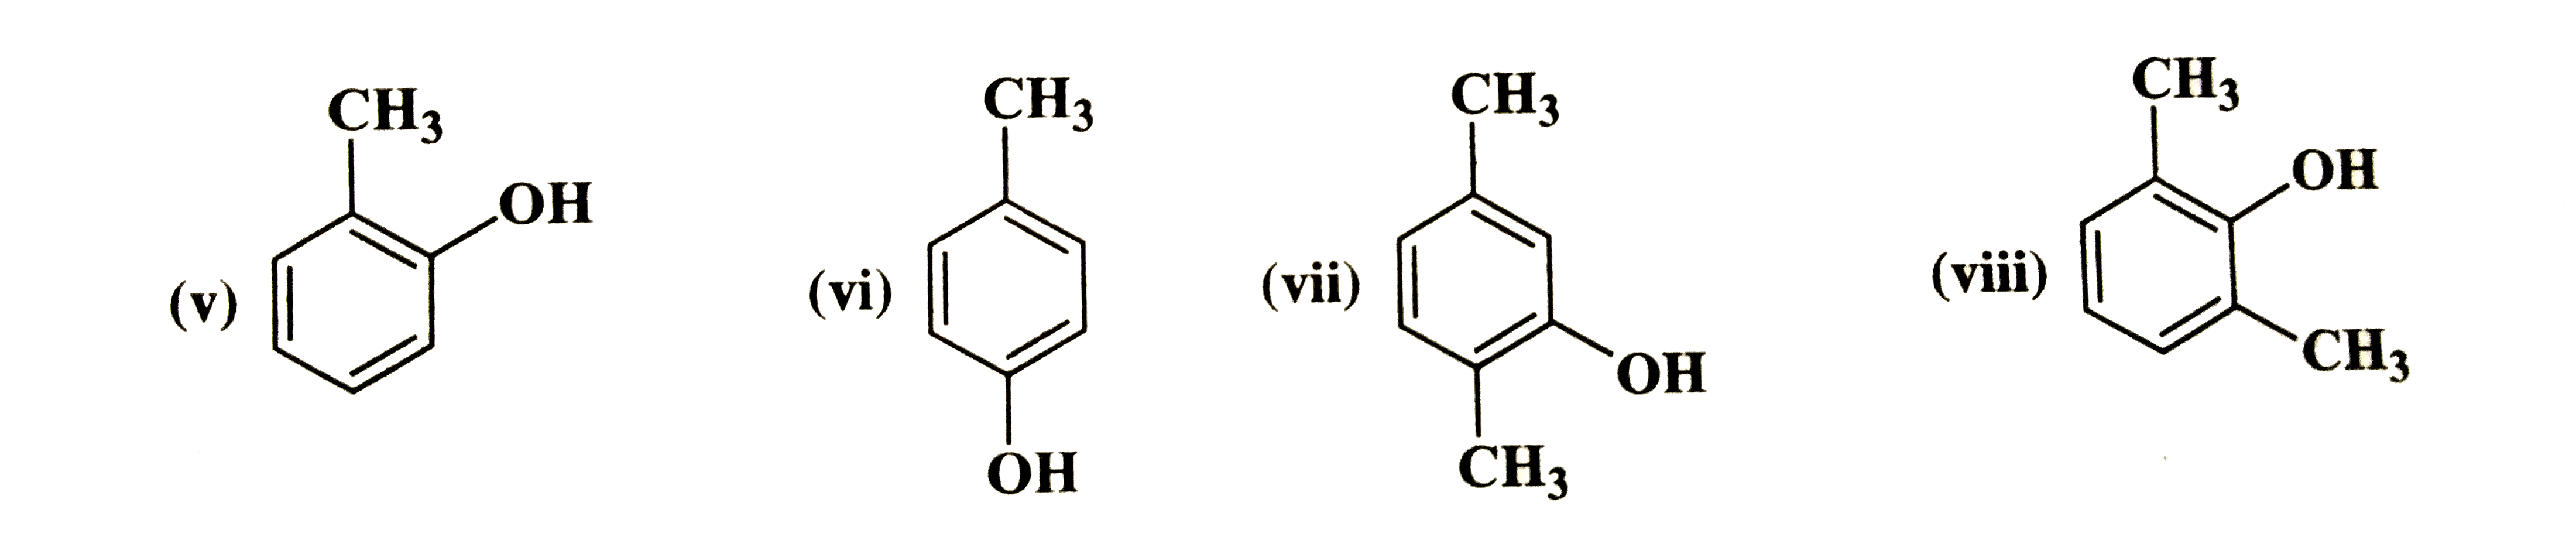 Write the IUPAC names of the following compounds:   (i) CH(3)-underset(CH(3))underset(|)(C)H-underset(OH)underset(|)(C)H-underset(CH(3))underset(|)overset(CH(3))overset(|)(C)-CH(3)   (ii) CH(3)-underset(OH)underset(|)(C)H-CH(2)-underset(OH)underset(|)(C)H-underset(CH(2)H(5))underset(|)(C)H-CH(2)CH(3)   (iii) CH(3)-underset(OH)underset(|)(C)H-underset(OH)underset(|)(C)H-CH(3)   (iv) HOCH(2)-CHOH-CH(2)OH      (ix) CH(3)-O-CH(2)-underset(CH(3))underset(|)(C)H-CH(3)   (x) C(6)H(5)-O-C(2)H(5)   (xi) C(6)H(5)-O-C(7)H(15)(n-)   (xii) CH(3)CH(2)-O-underset(CH(3))underset(|)(C)H-CH(2)CH(3)